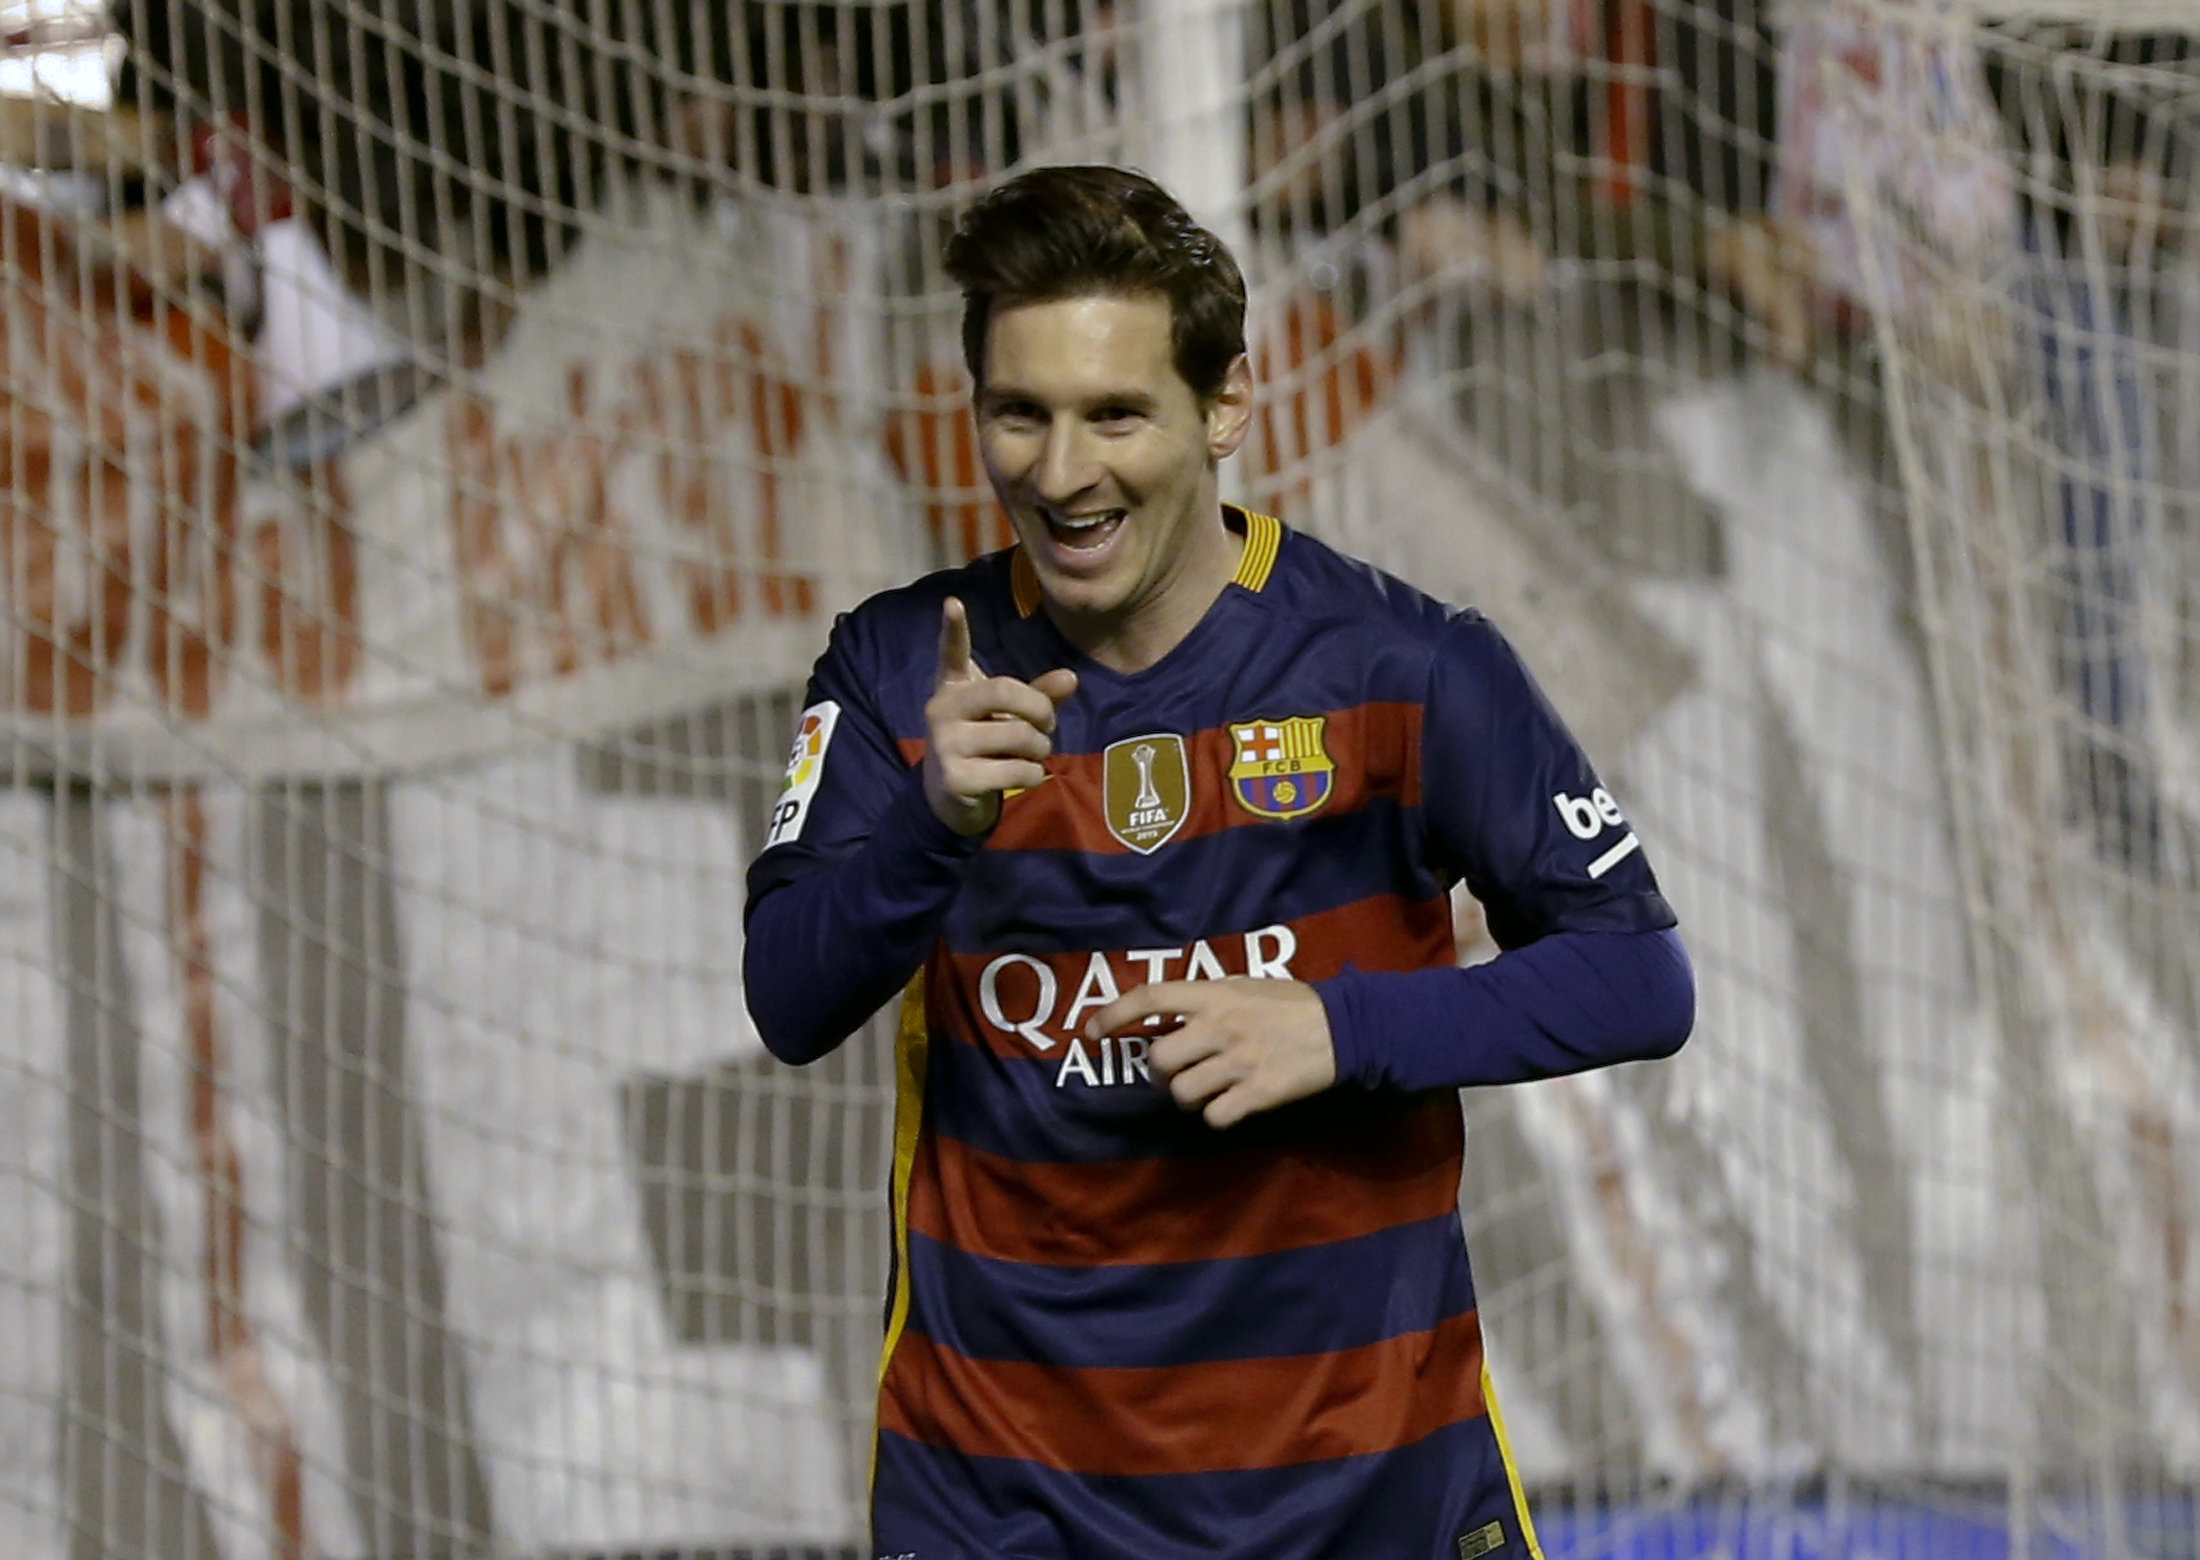 Lionel Messi scored at hat-trick for Barcelona on the day they set the record for 35 unbeaten matches. Photo: Reuters